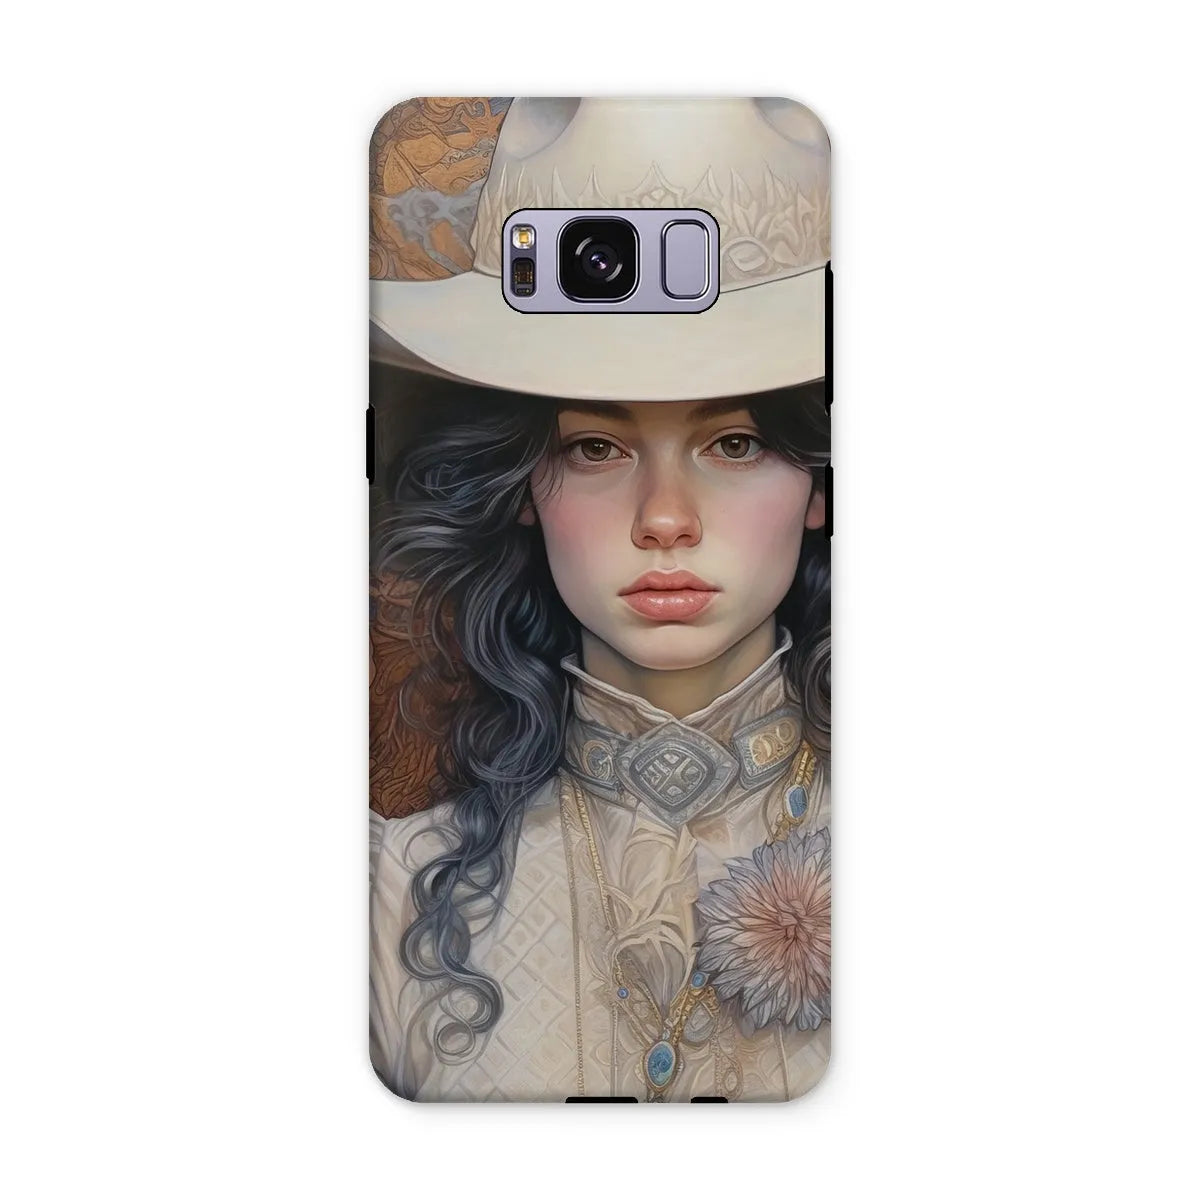 Helena The Lesbian Cowgirl - Sapphic Art Phone Case - Samsung Galaxy S8 Plus / Matte - Mobile Phone Cases - Aesthetic